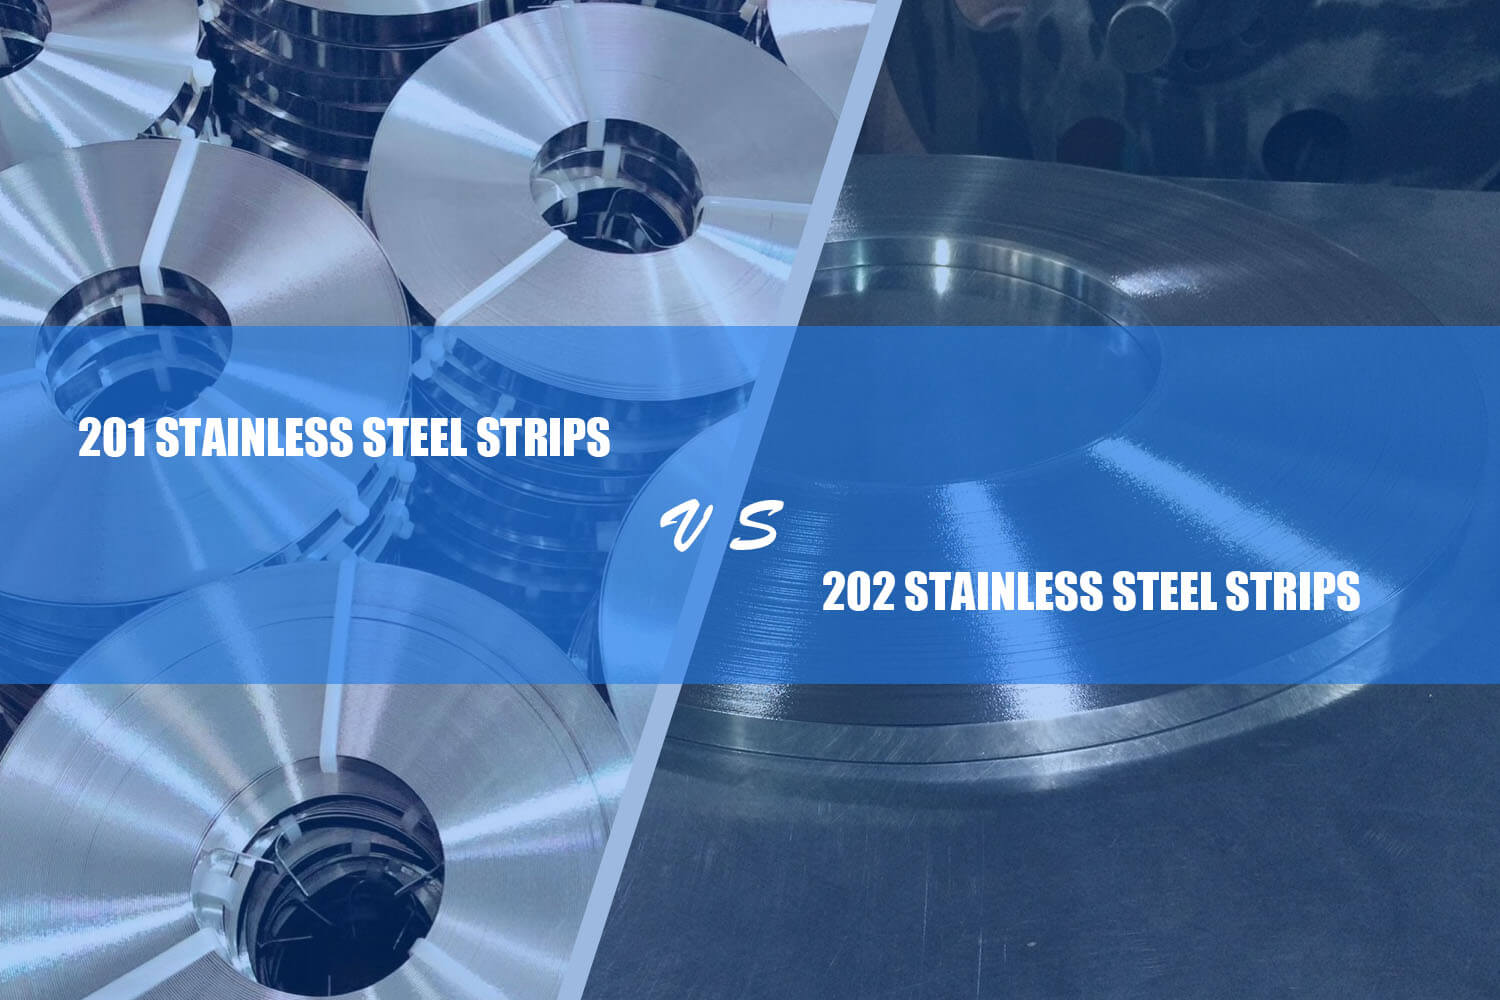 201 stainless steel strip vs 202 不銹鋼帶